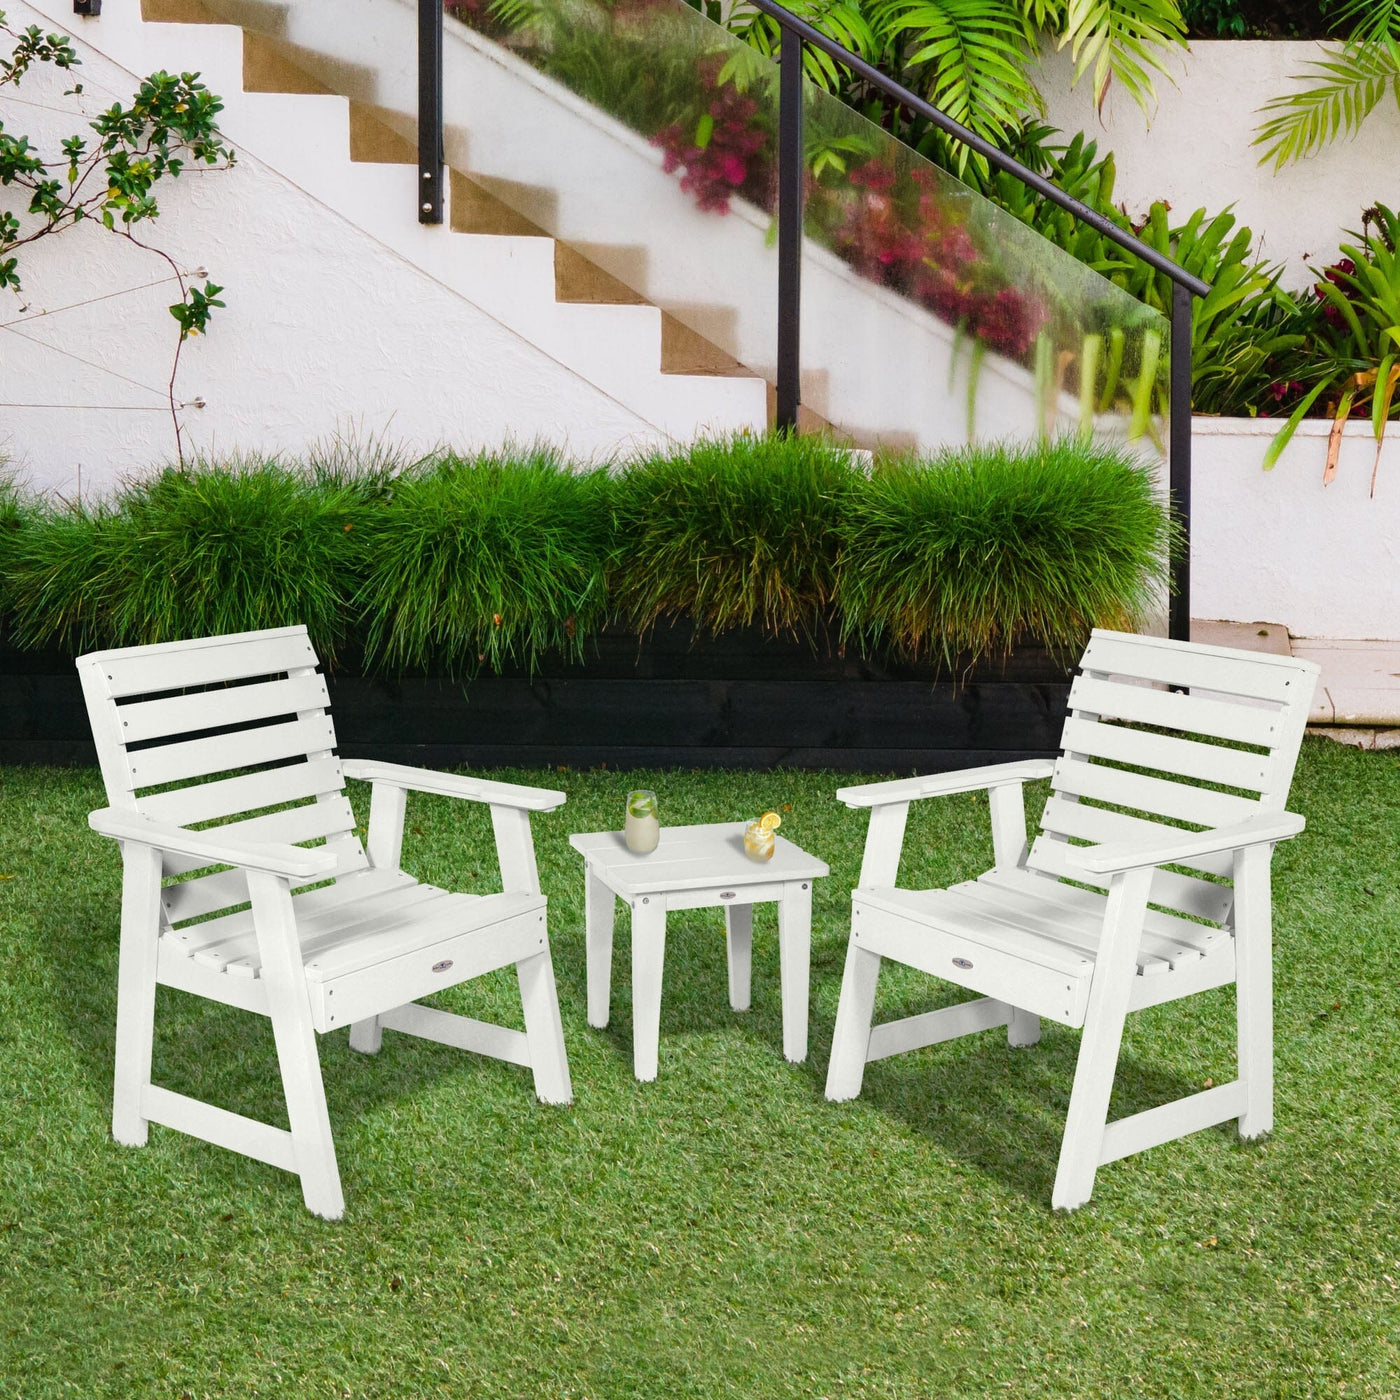 Two Riverside Garden Chairs and Side Table Set Kitted Set Bahia Verde Outdoors 